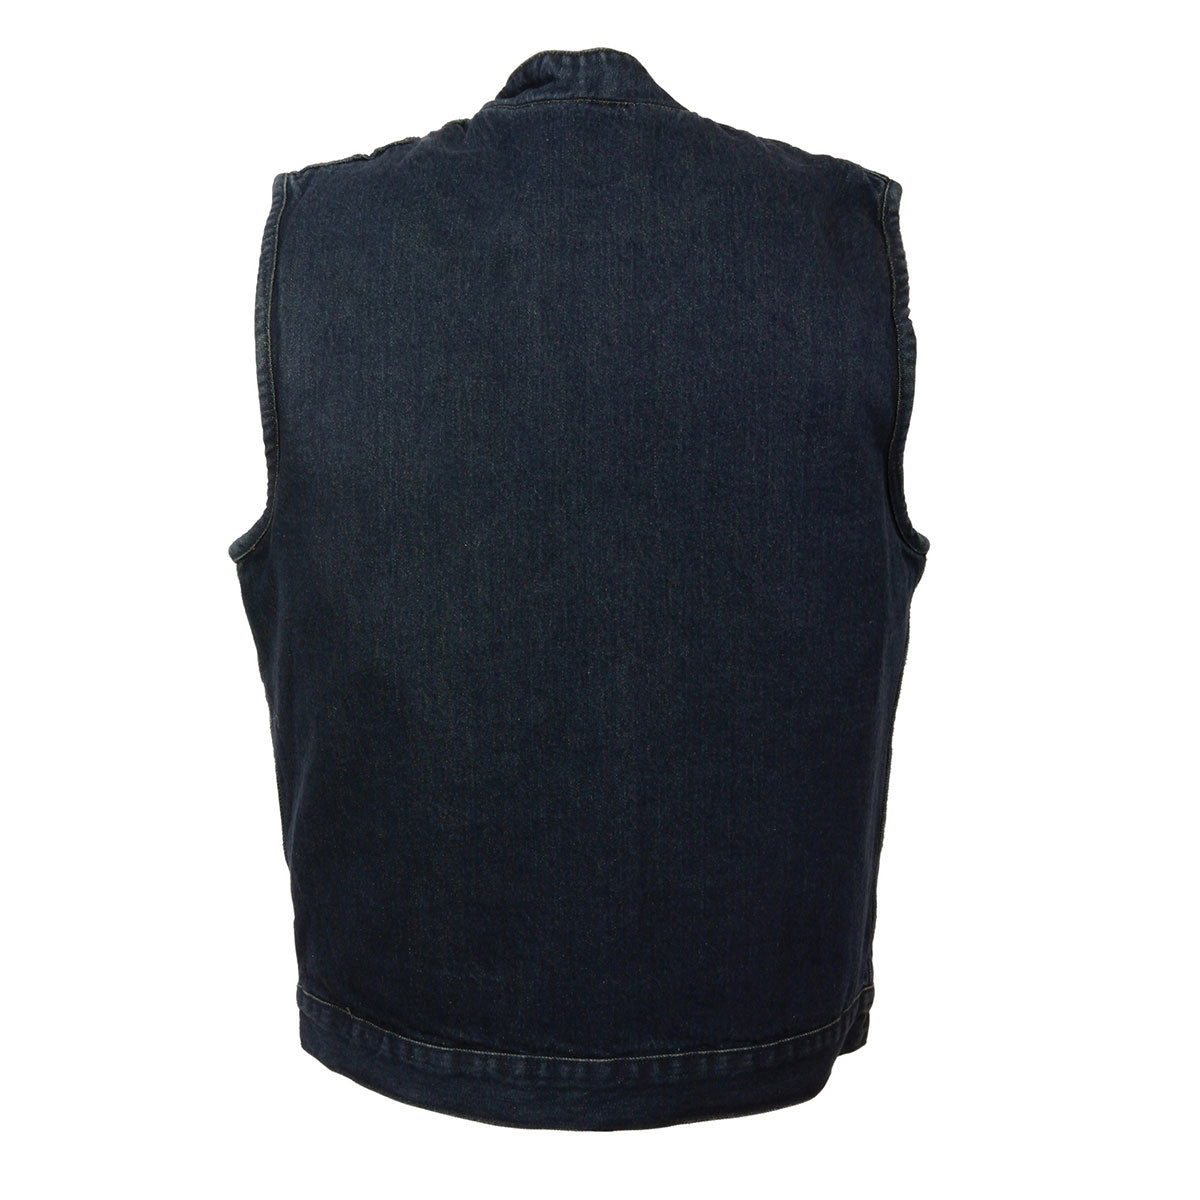 M Boss Motorcycle Apparel Apparel BOS13520 Men's Blue Denim Snap Front Club Style Motorcycle Rider Vest